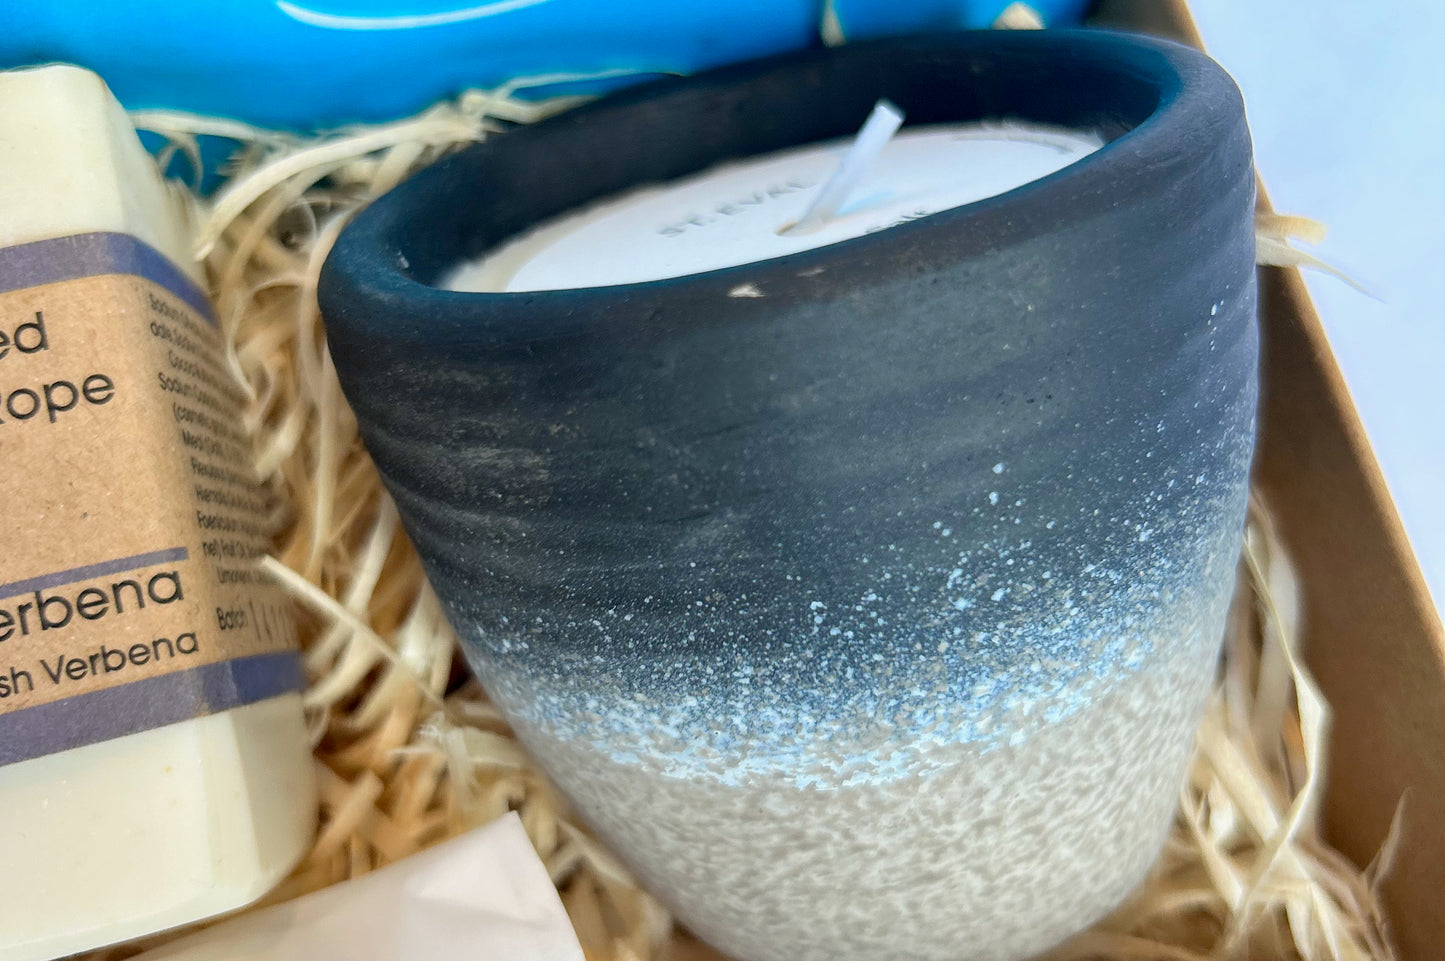 Sand and Sparkle Relaxation Gift Box with Cornish coastal candle, natural skincare and herbal tea